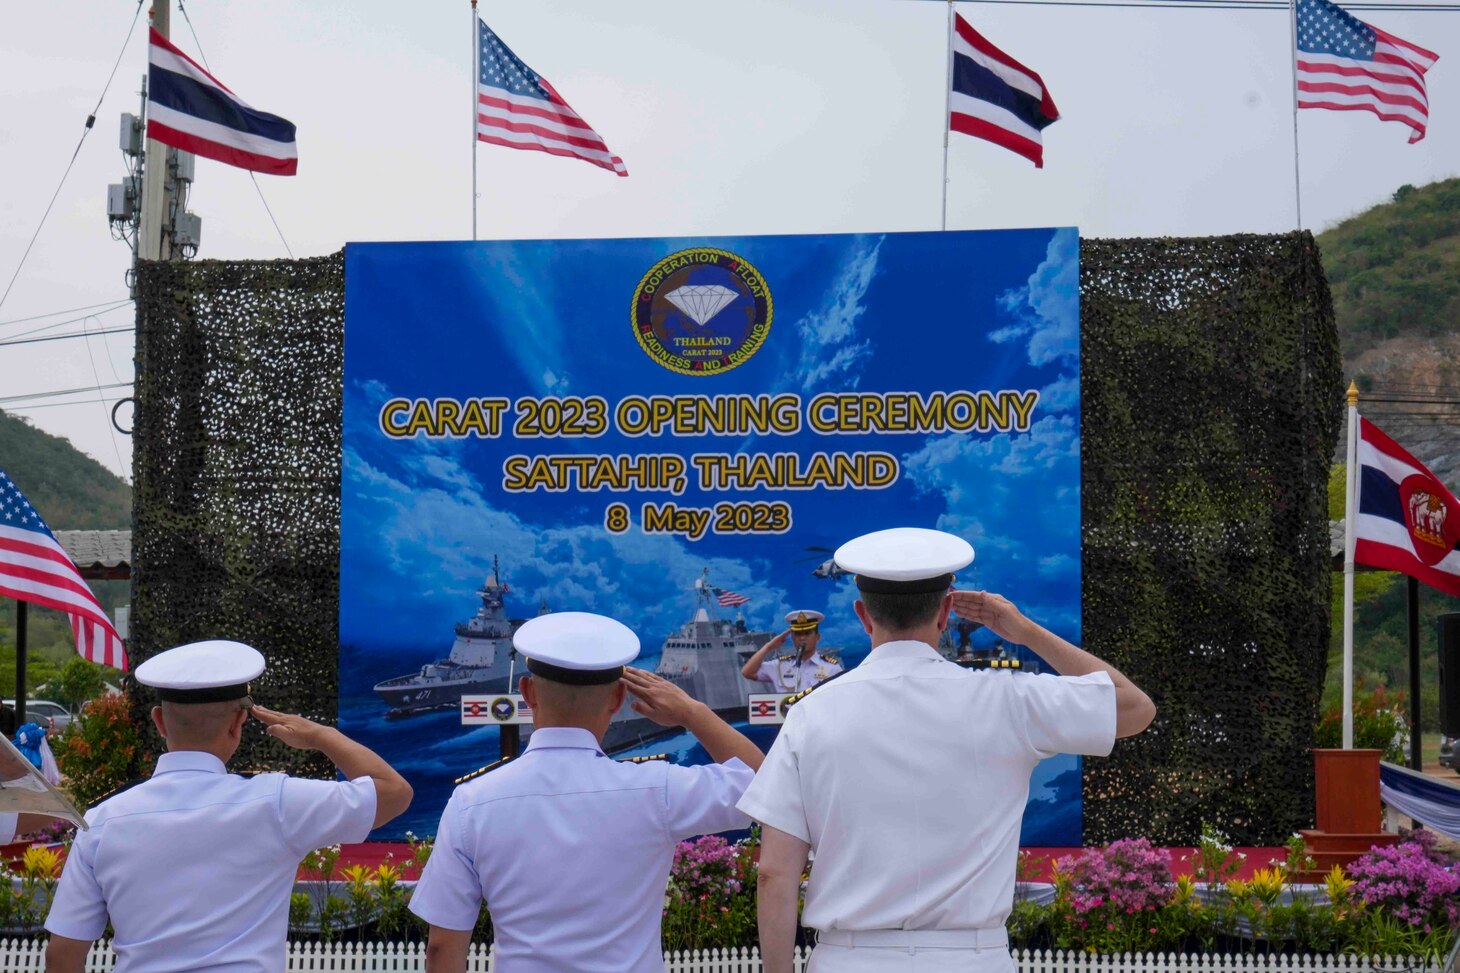 U.S. and Royal Thai Navy officers rehearse for the opening ceremony of Cooperation Afloat Readiness and Training (CARAT)/Marine Exercise (MAREX) Thailand 2023 at Royal Thai Fleet Headquarters, May 8. CARAT/MAREX Thailand is a bilateral exercise between the Kingdom of Thailand and United States to promote regional security cooperation, practice humanitarian assistance and disaster relief, and strengthen maritime understanding, partnerships and interoperability. Thailand has been part of the CARAT exercise series since 1995. In its 29th year, the CARAT series is comprised of multinational exercises, designed to enhance U.S. and partner forces’ abilities to operate together in response to traditional and non-traditional maritime security challenges in the Indo-Pacific region.